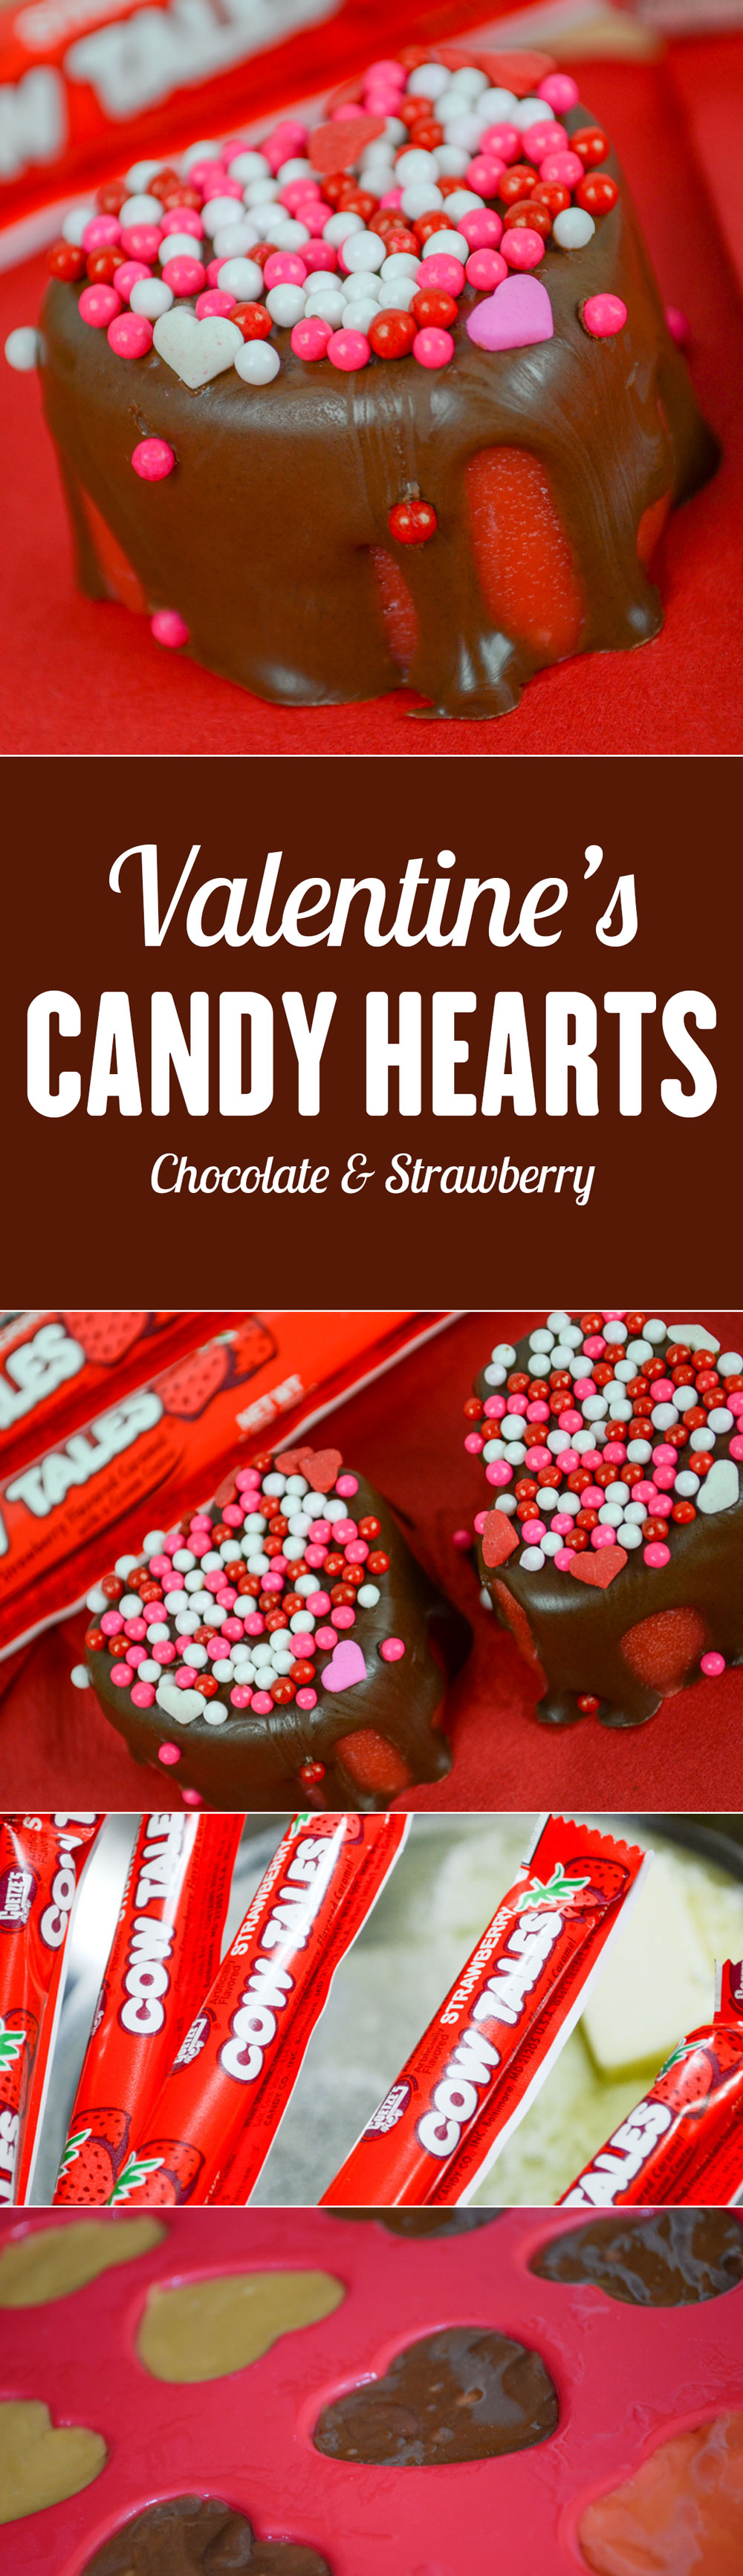 What a sweet idea! I love chocolate covered strawberries! Recipe: Chocolate & Strawberry Valentine's Day Candy Hearts Made With Strawberry Cow Tales®, Silicon Heart Candy Mold, Valentine's Day Sprinkles, and Chocolate Chips